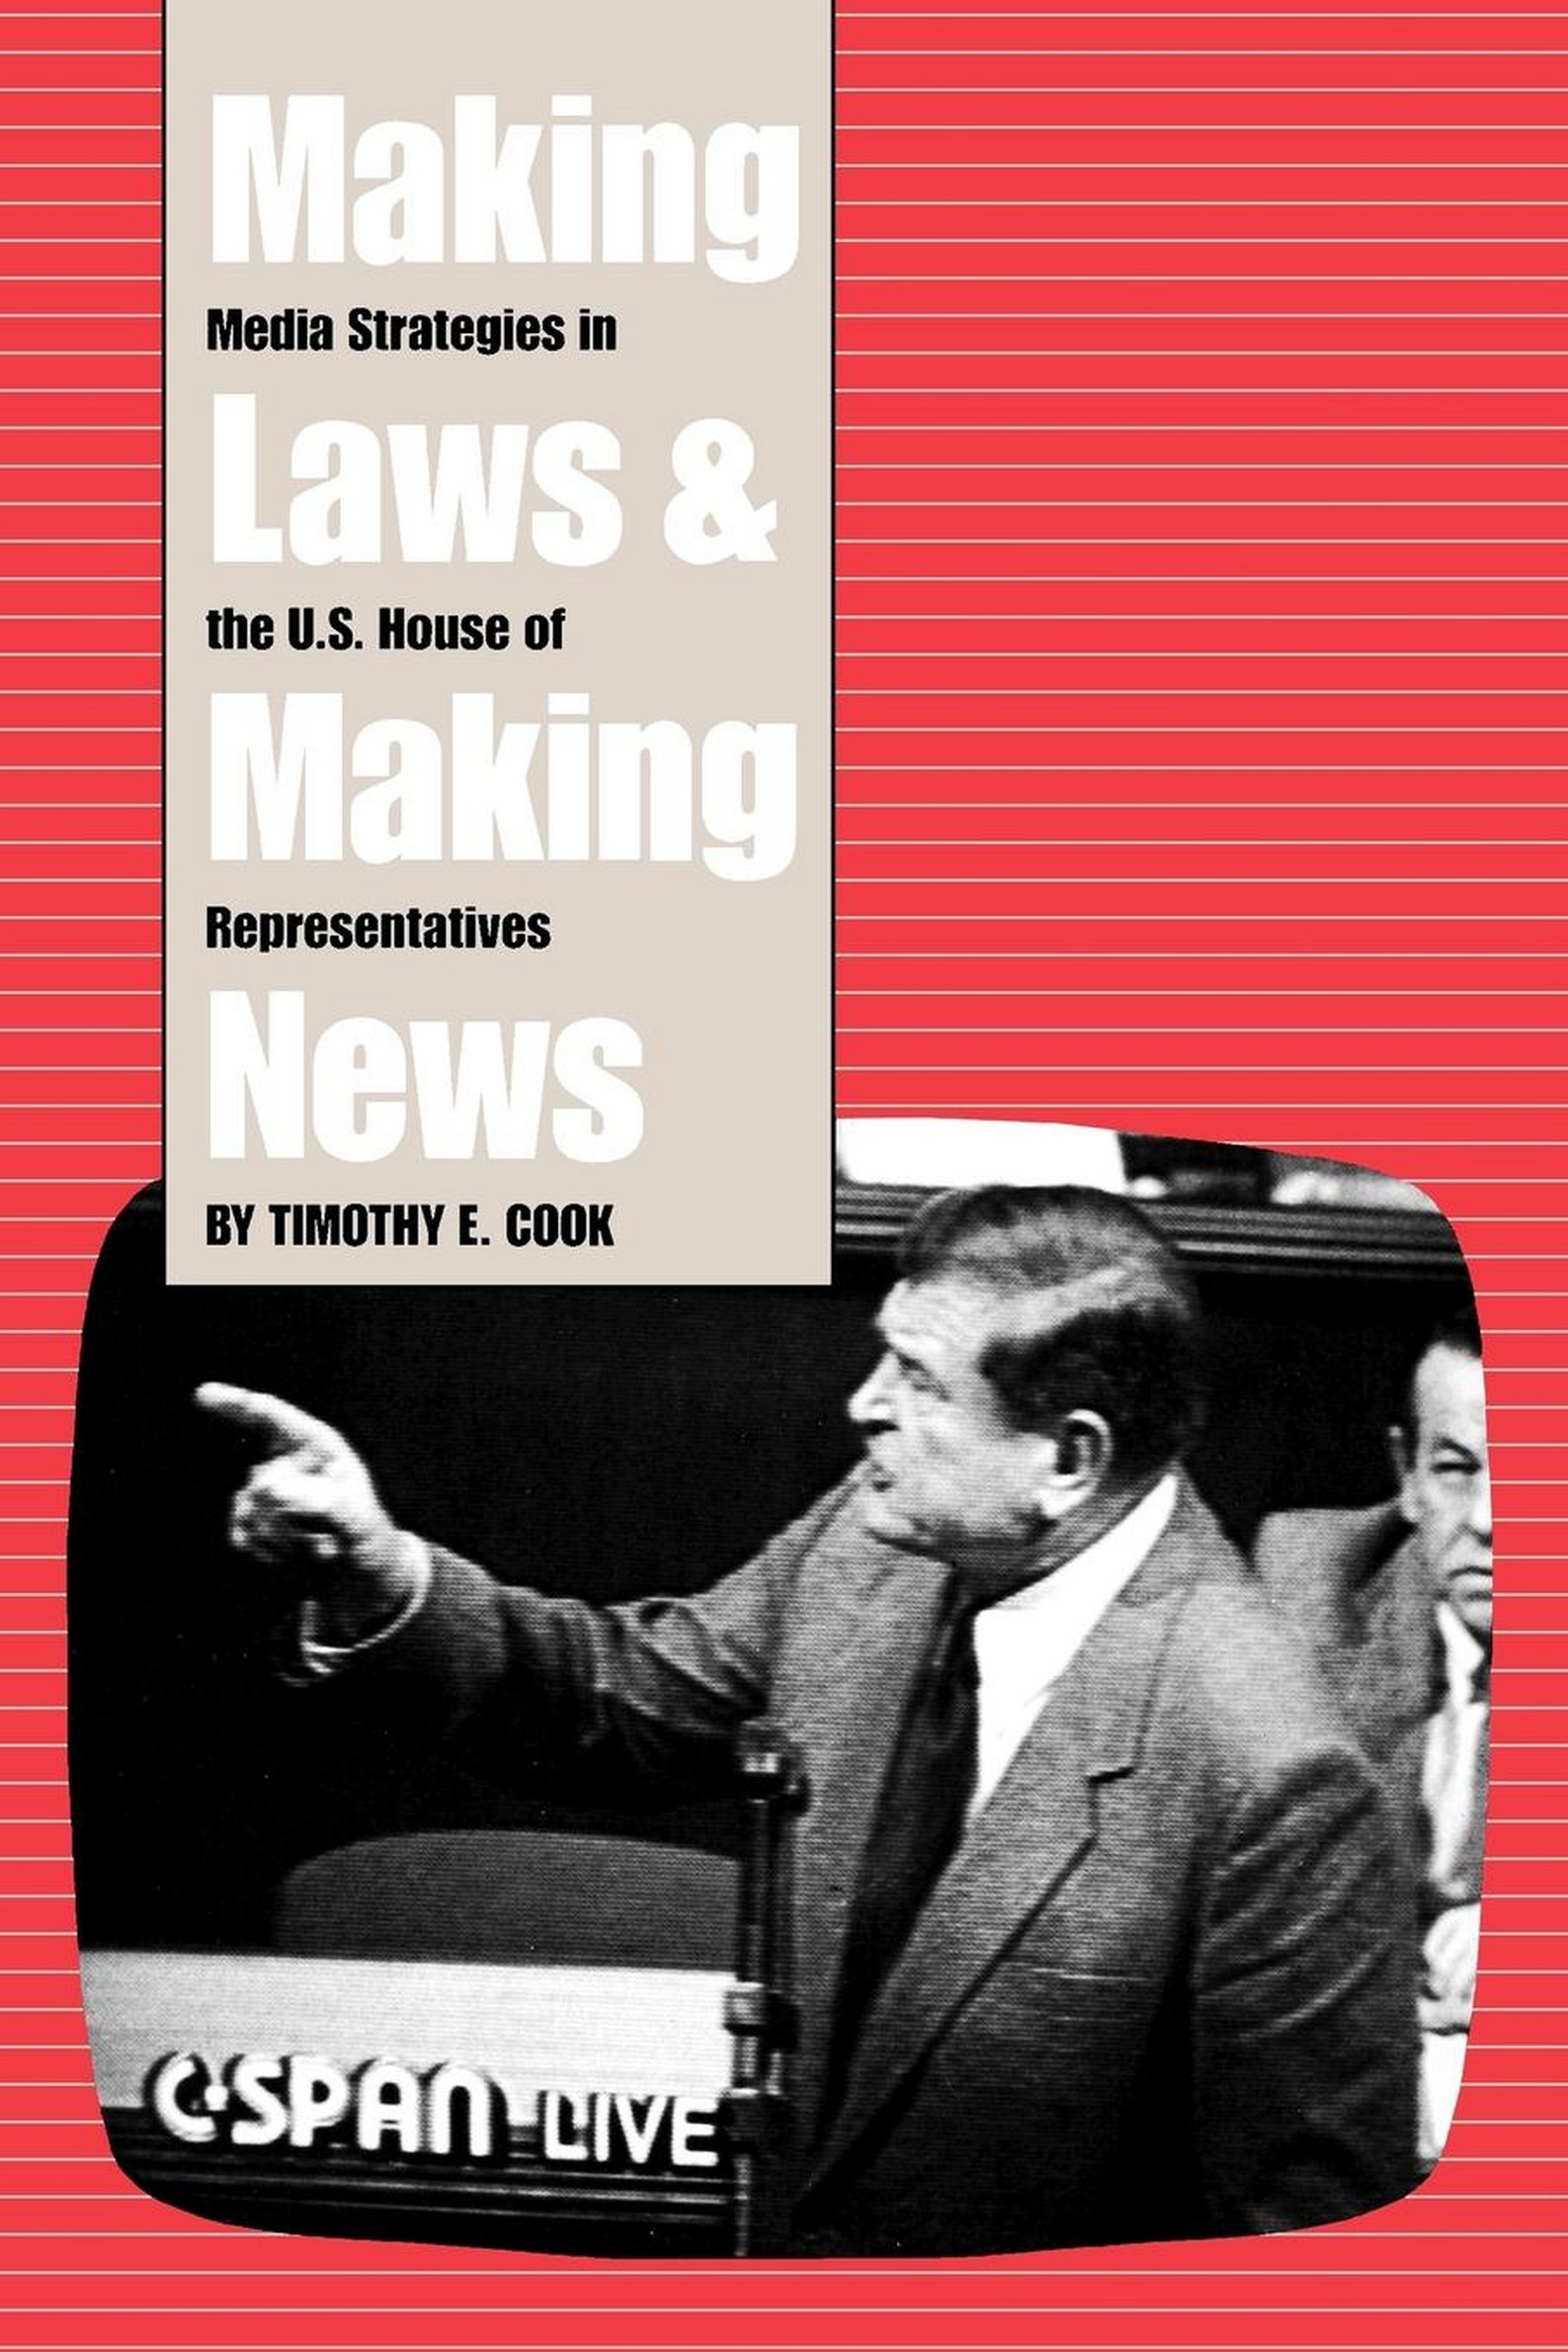 Making Laws and Making News: Media Strategies in the U.S. House of Representatives